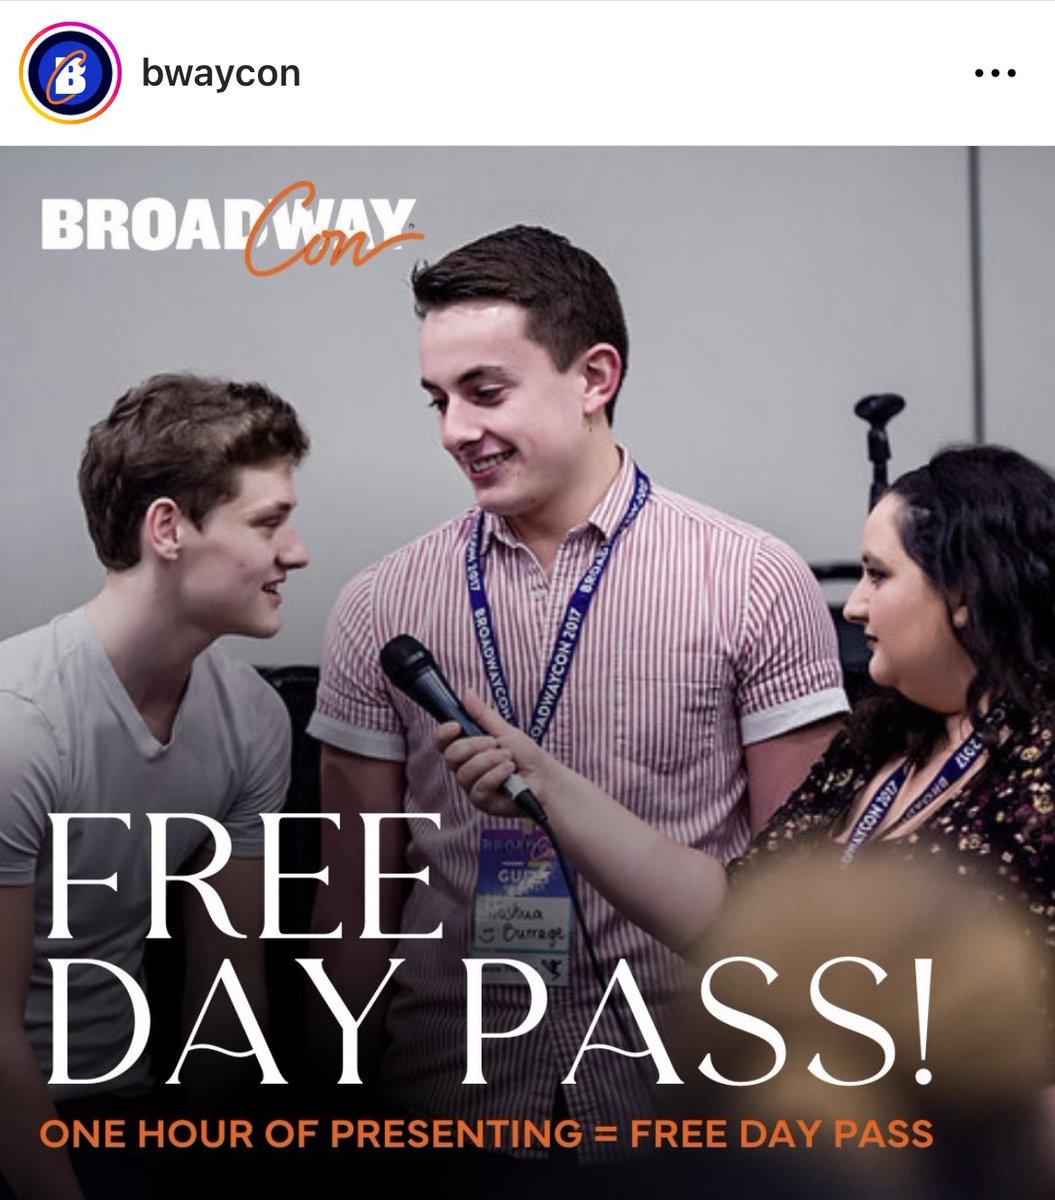 broadwaycon just posted this i’m never beating the fansie allegations